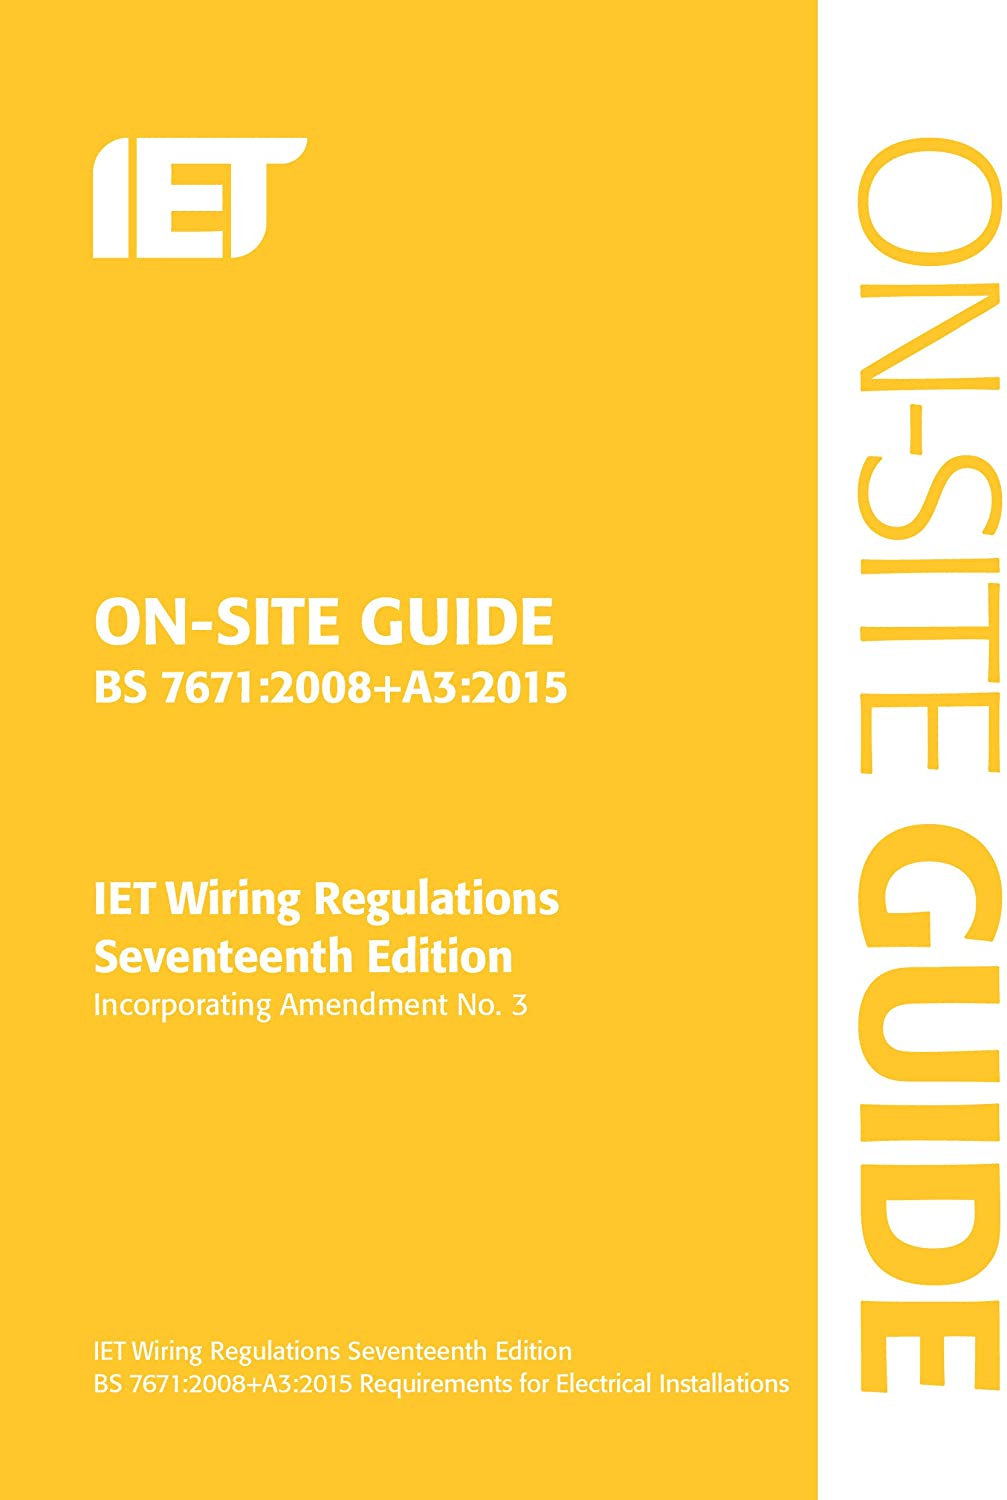 On-Site Guide (BS 7671:2008+A3:2015) (Electrical Regulations)